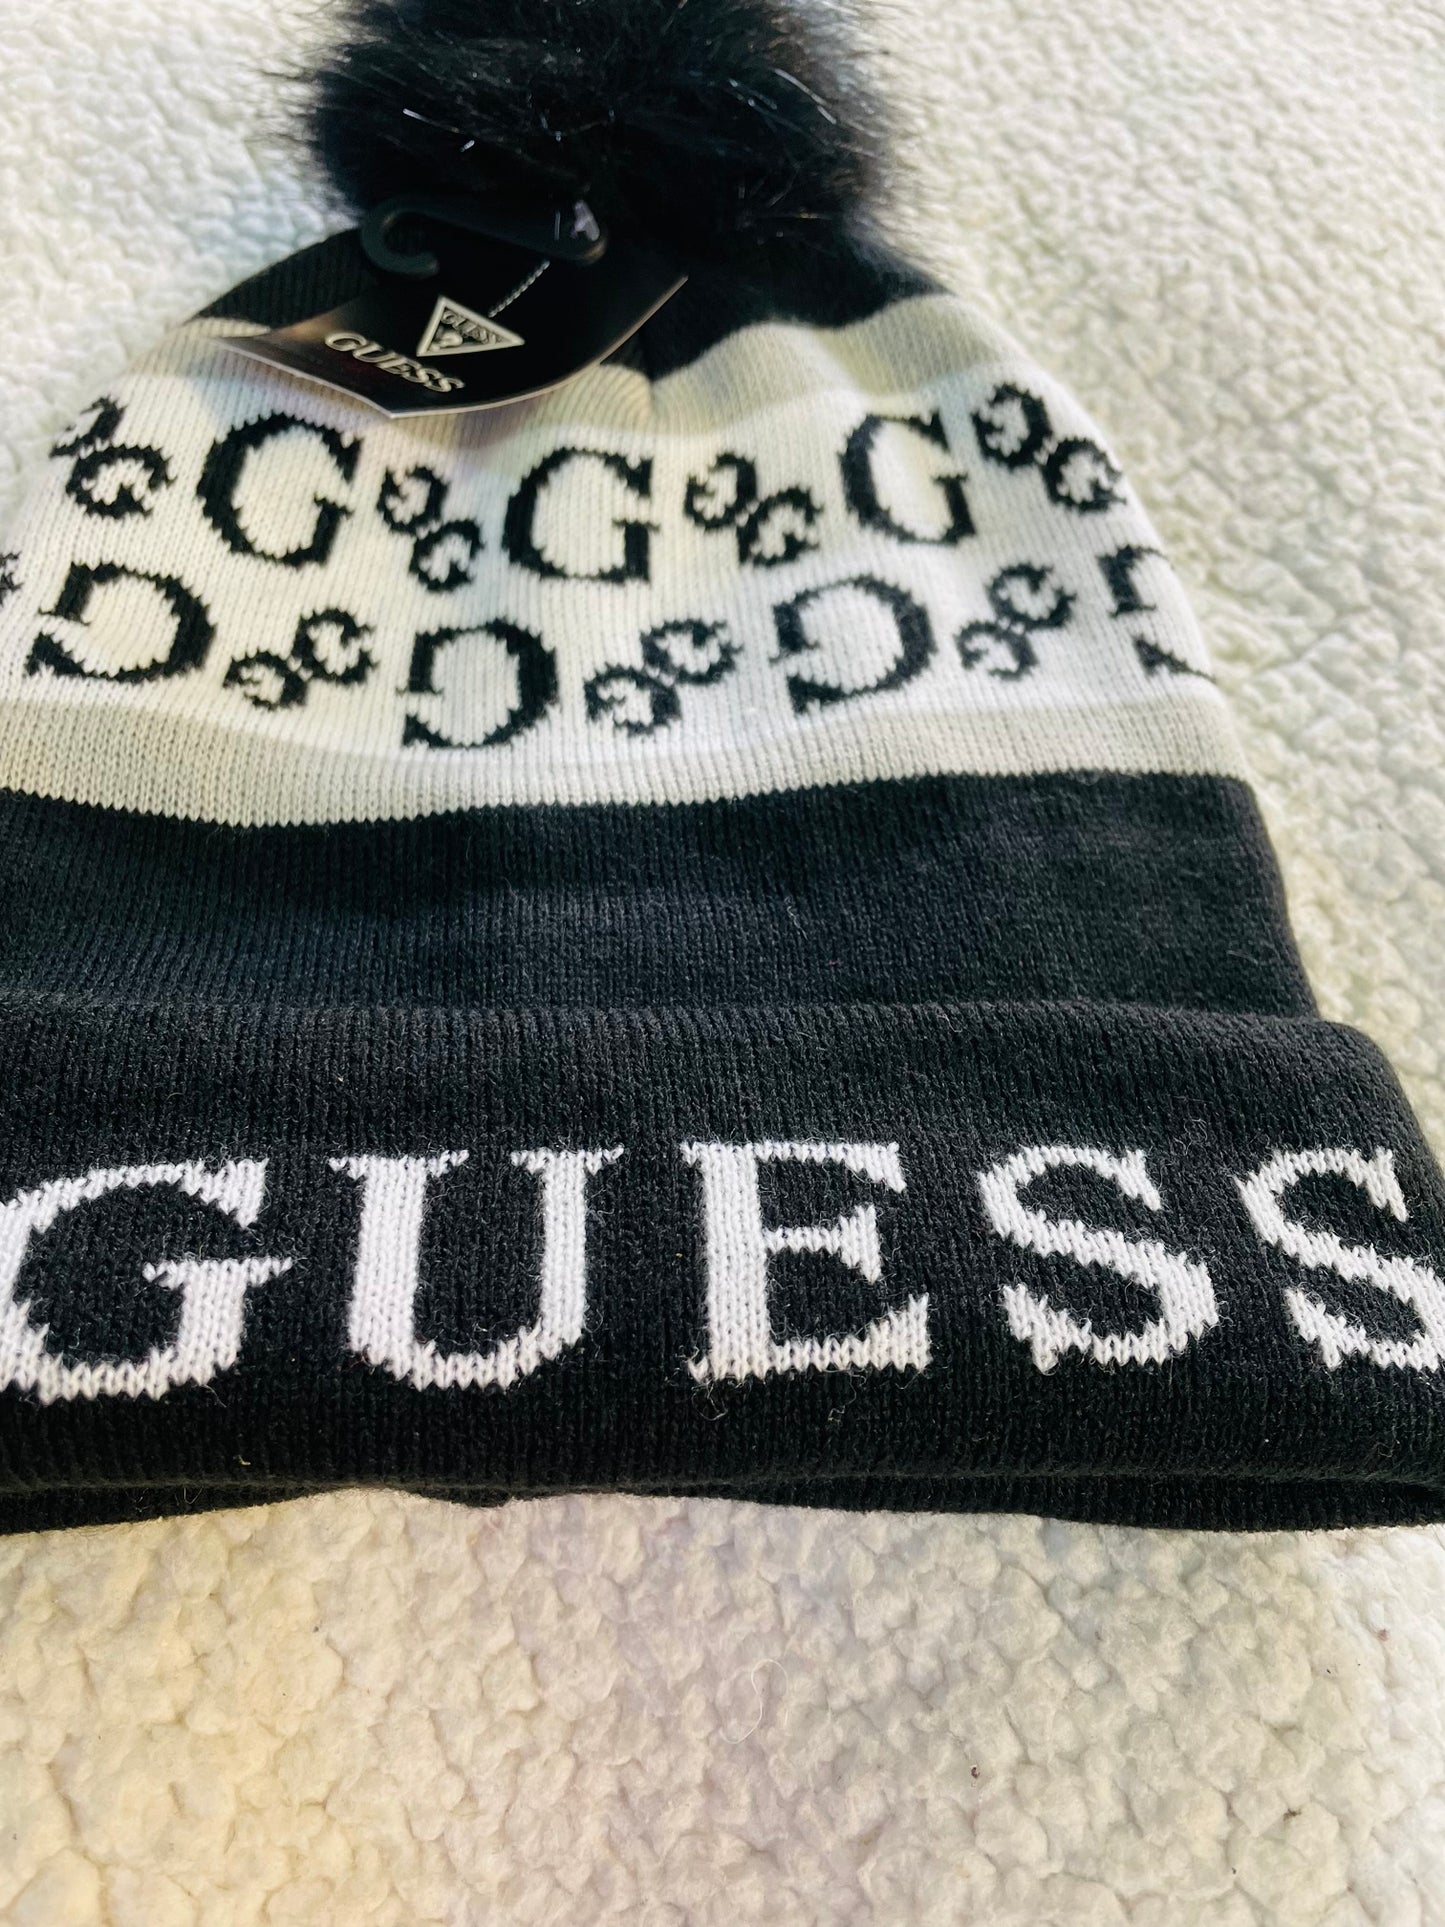 Guess hat